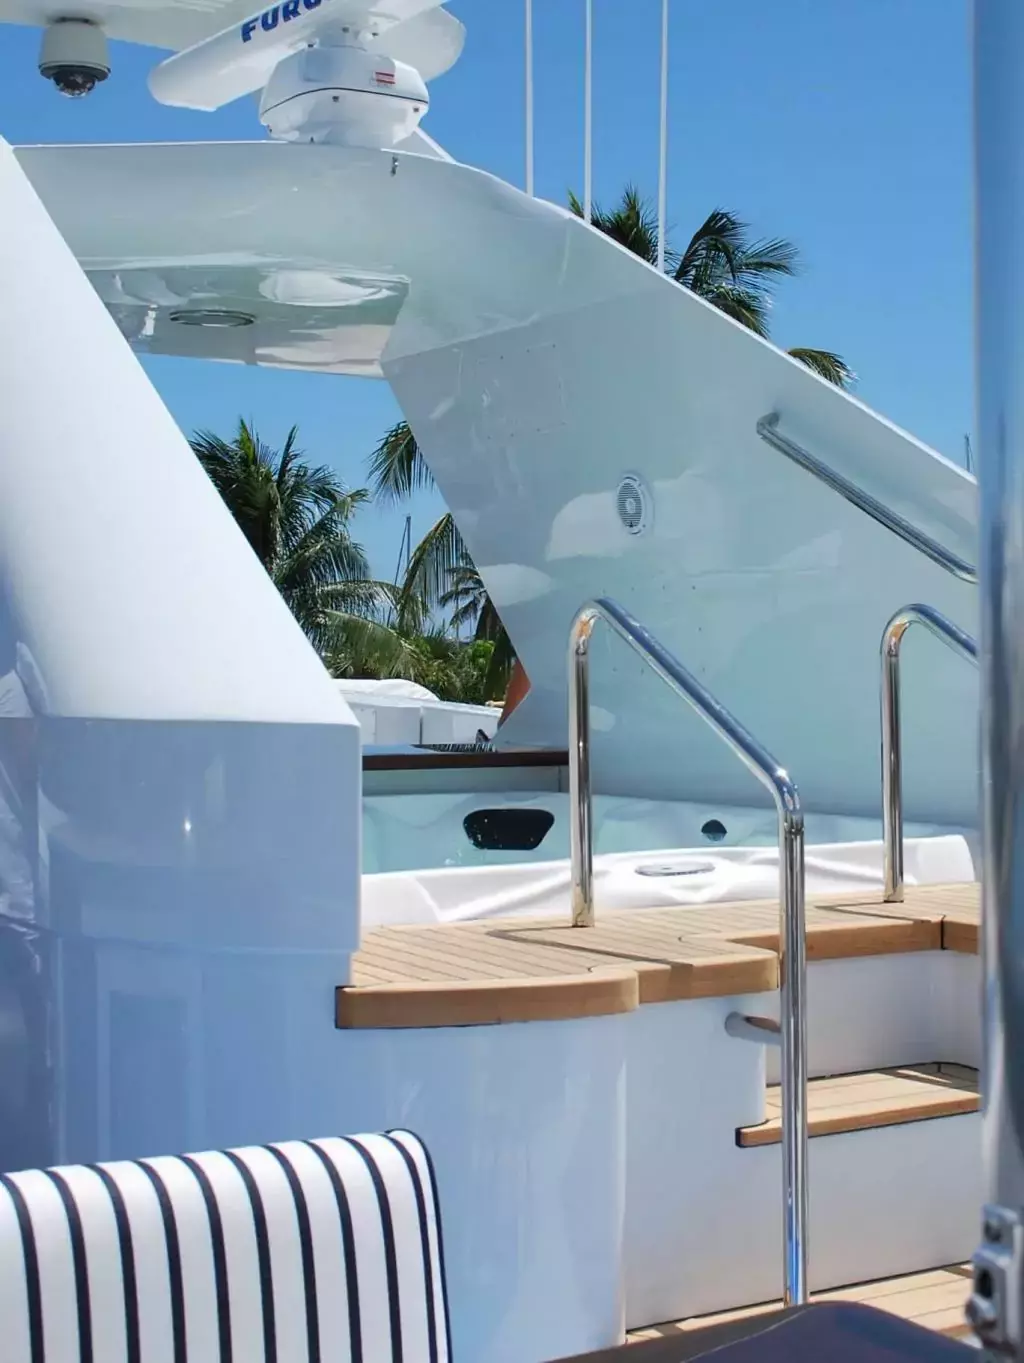 Themis by Trinity Yachts - Top rates for a Charter of a private Superyacht in Curacao